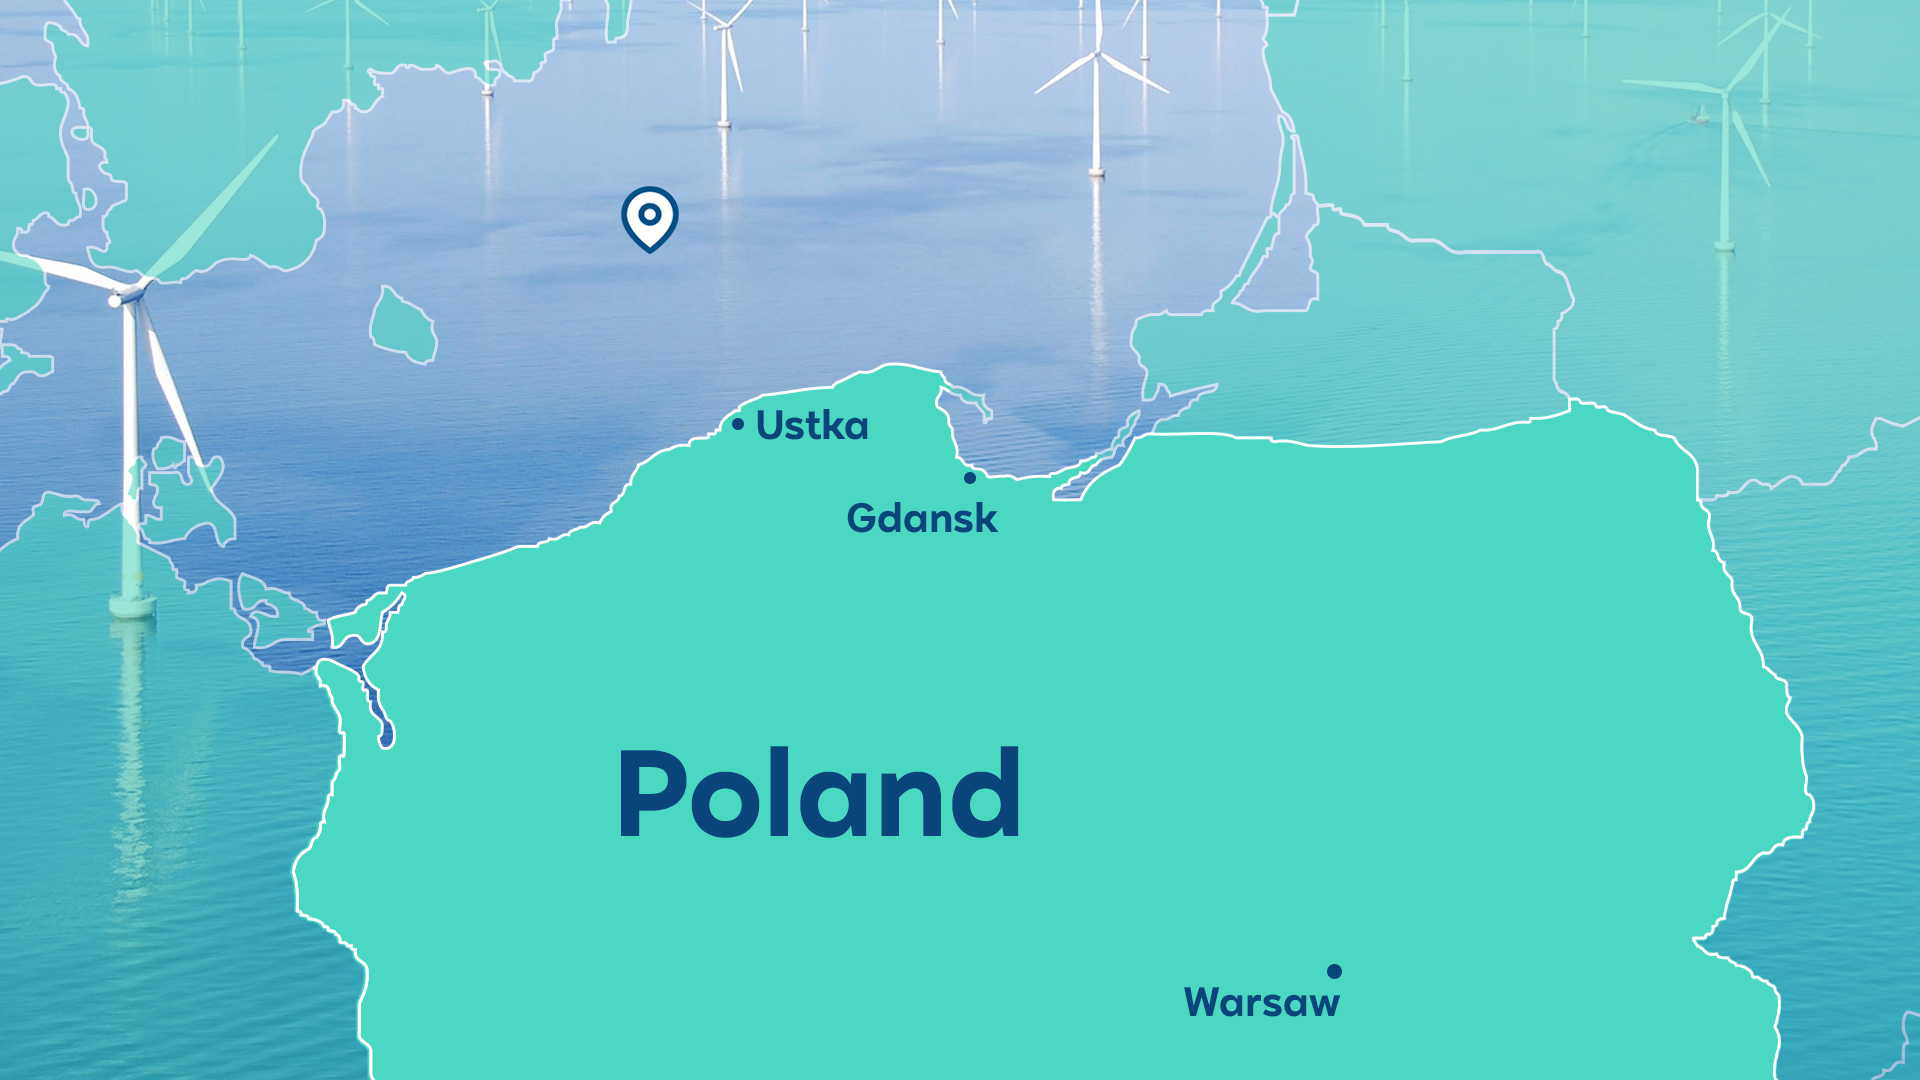 RWE bids for offshore wind seabed permit in Poland